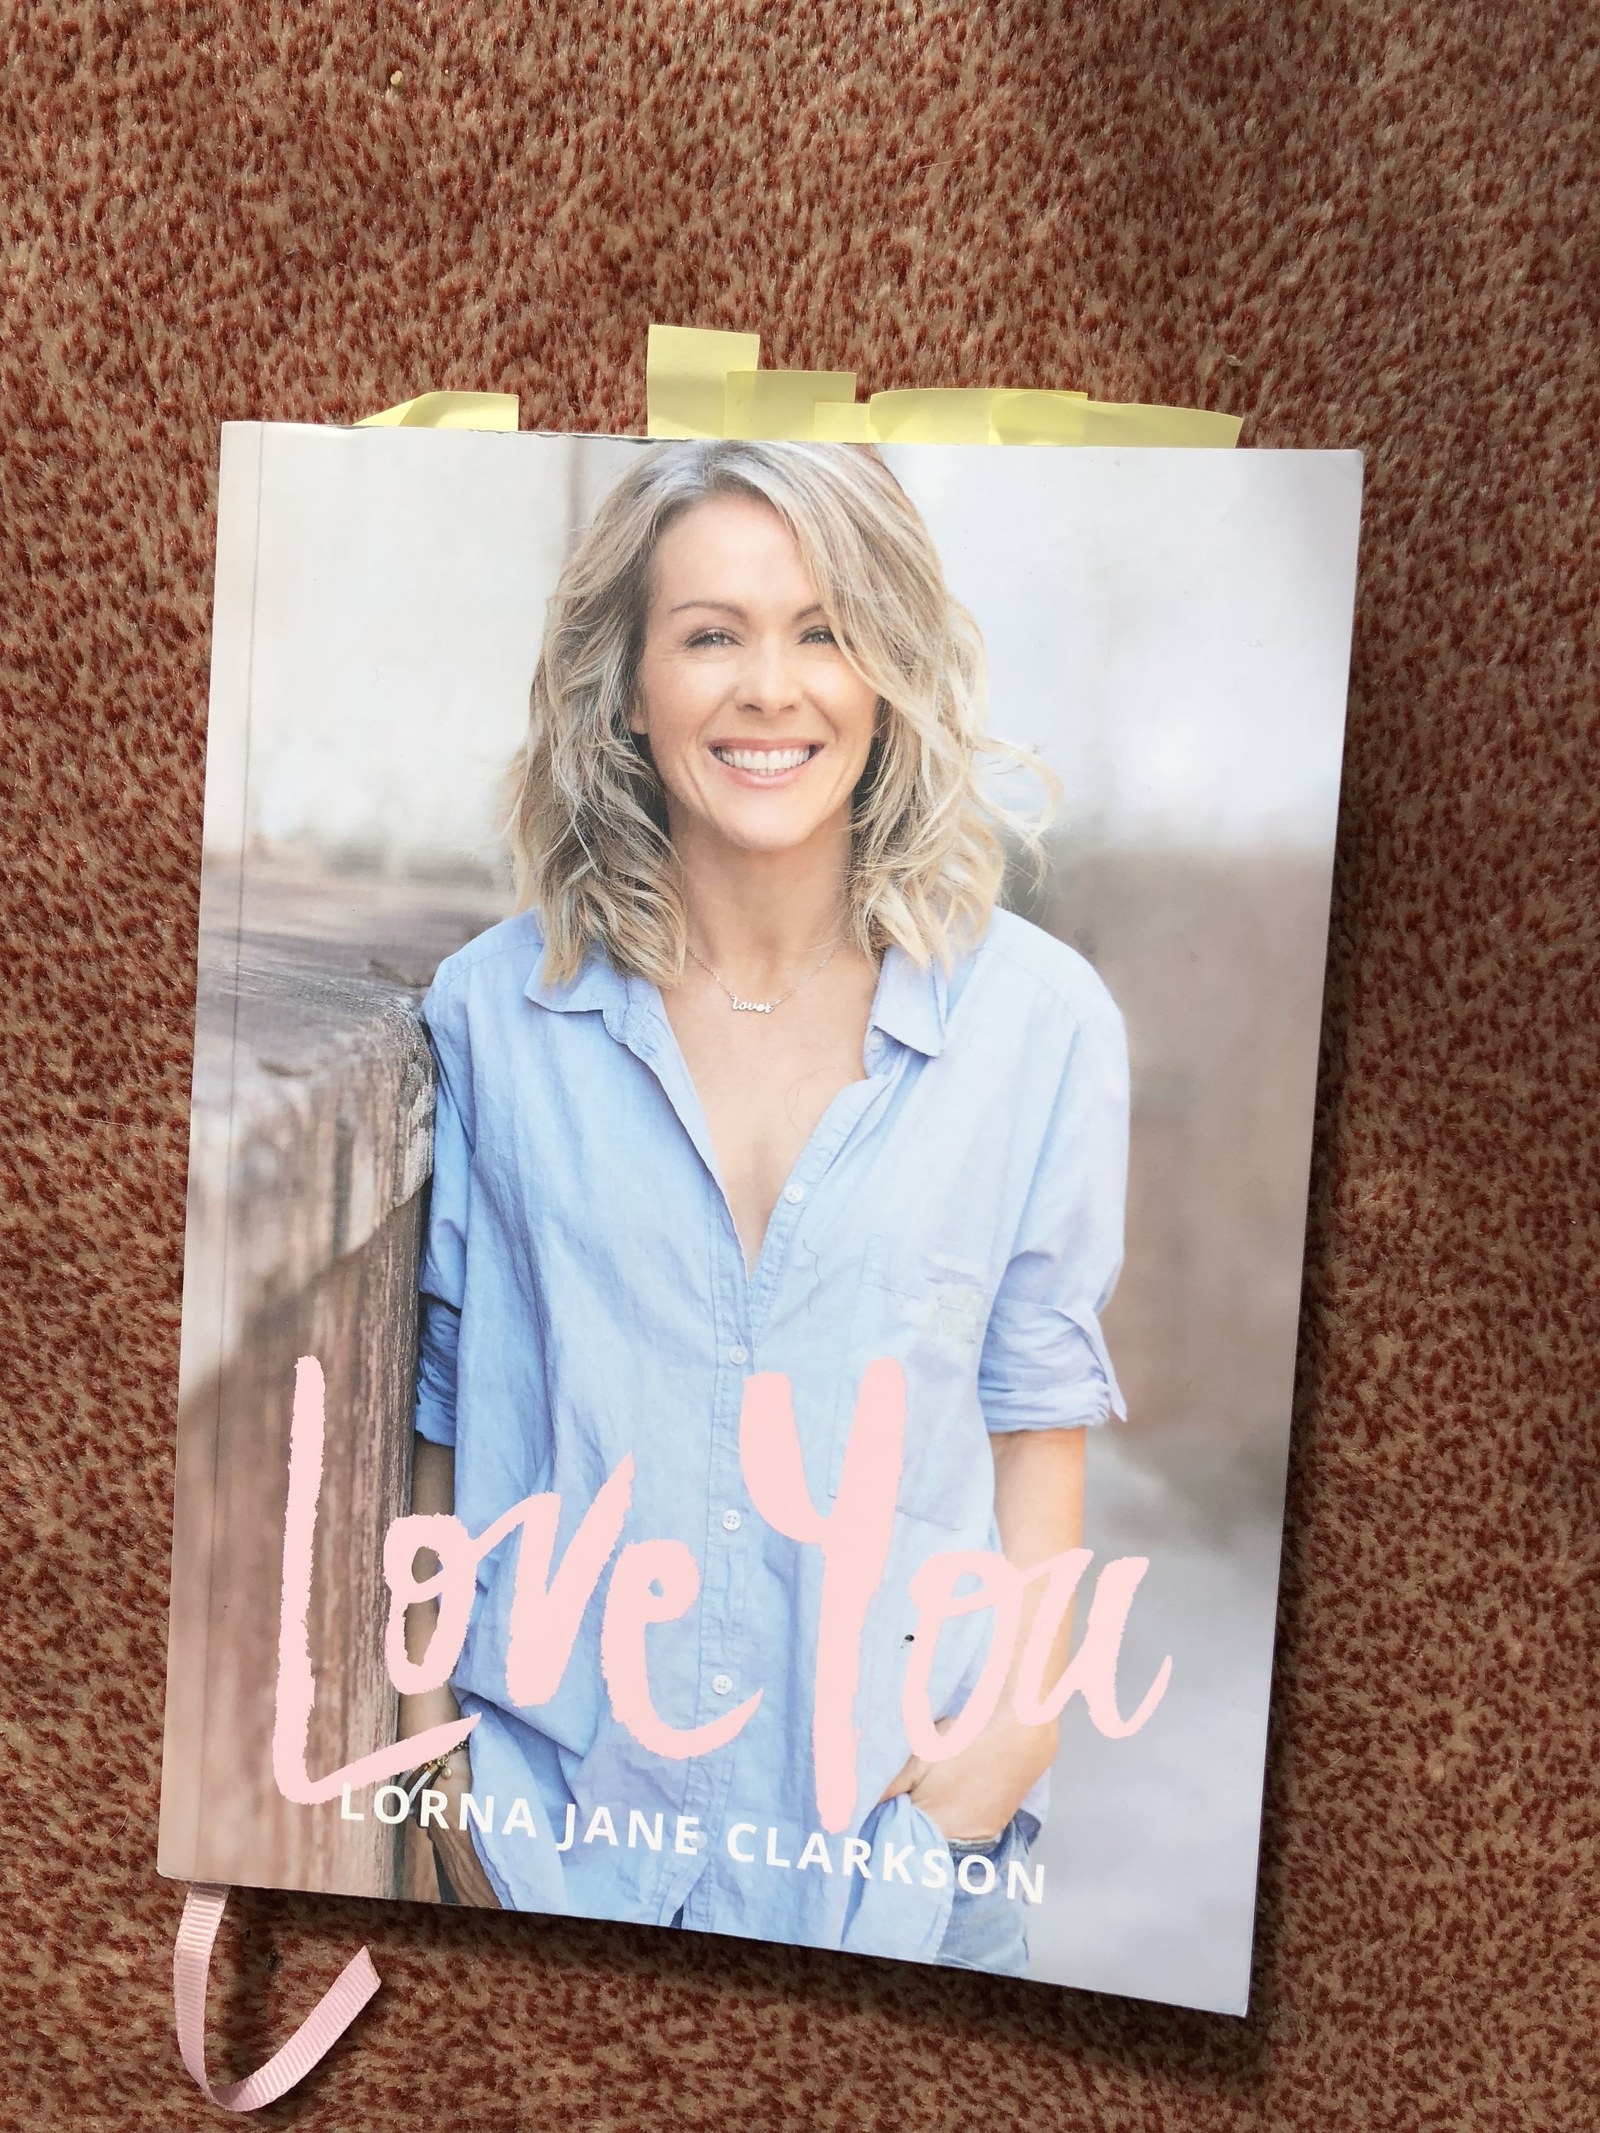 I Tried Recipes And Yoga From Lorna Jane's New Book To See What It's Like